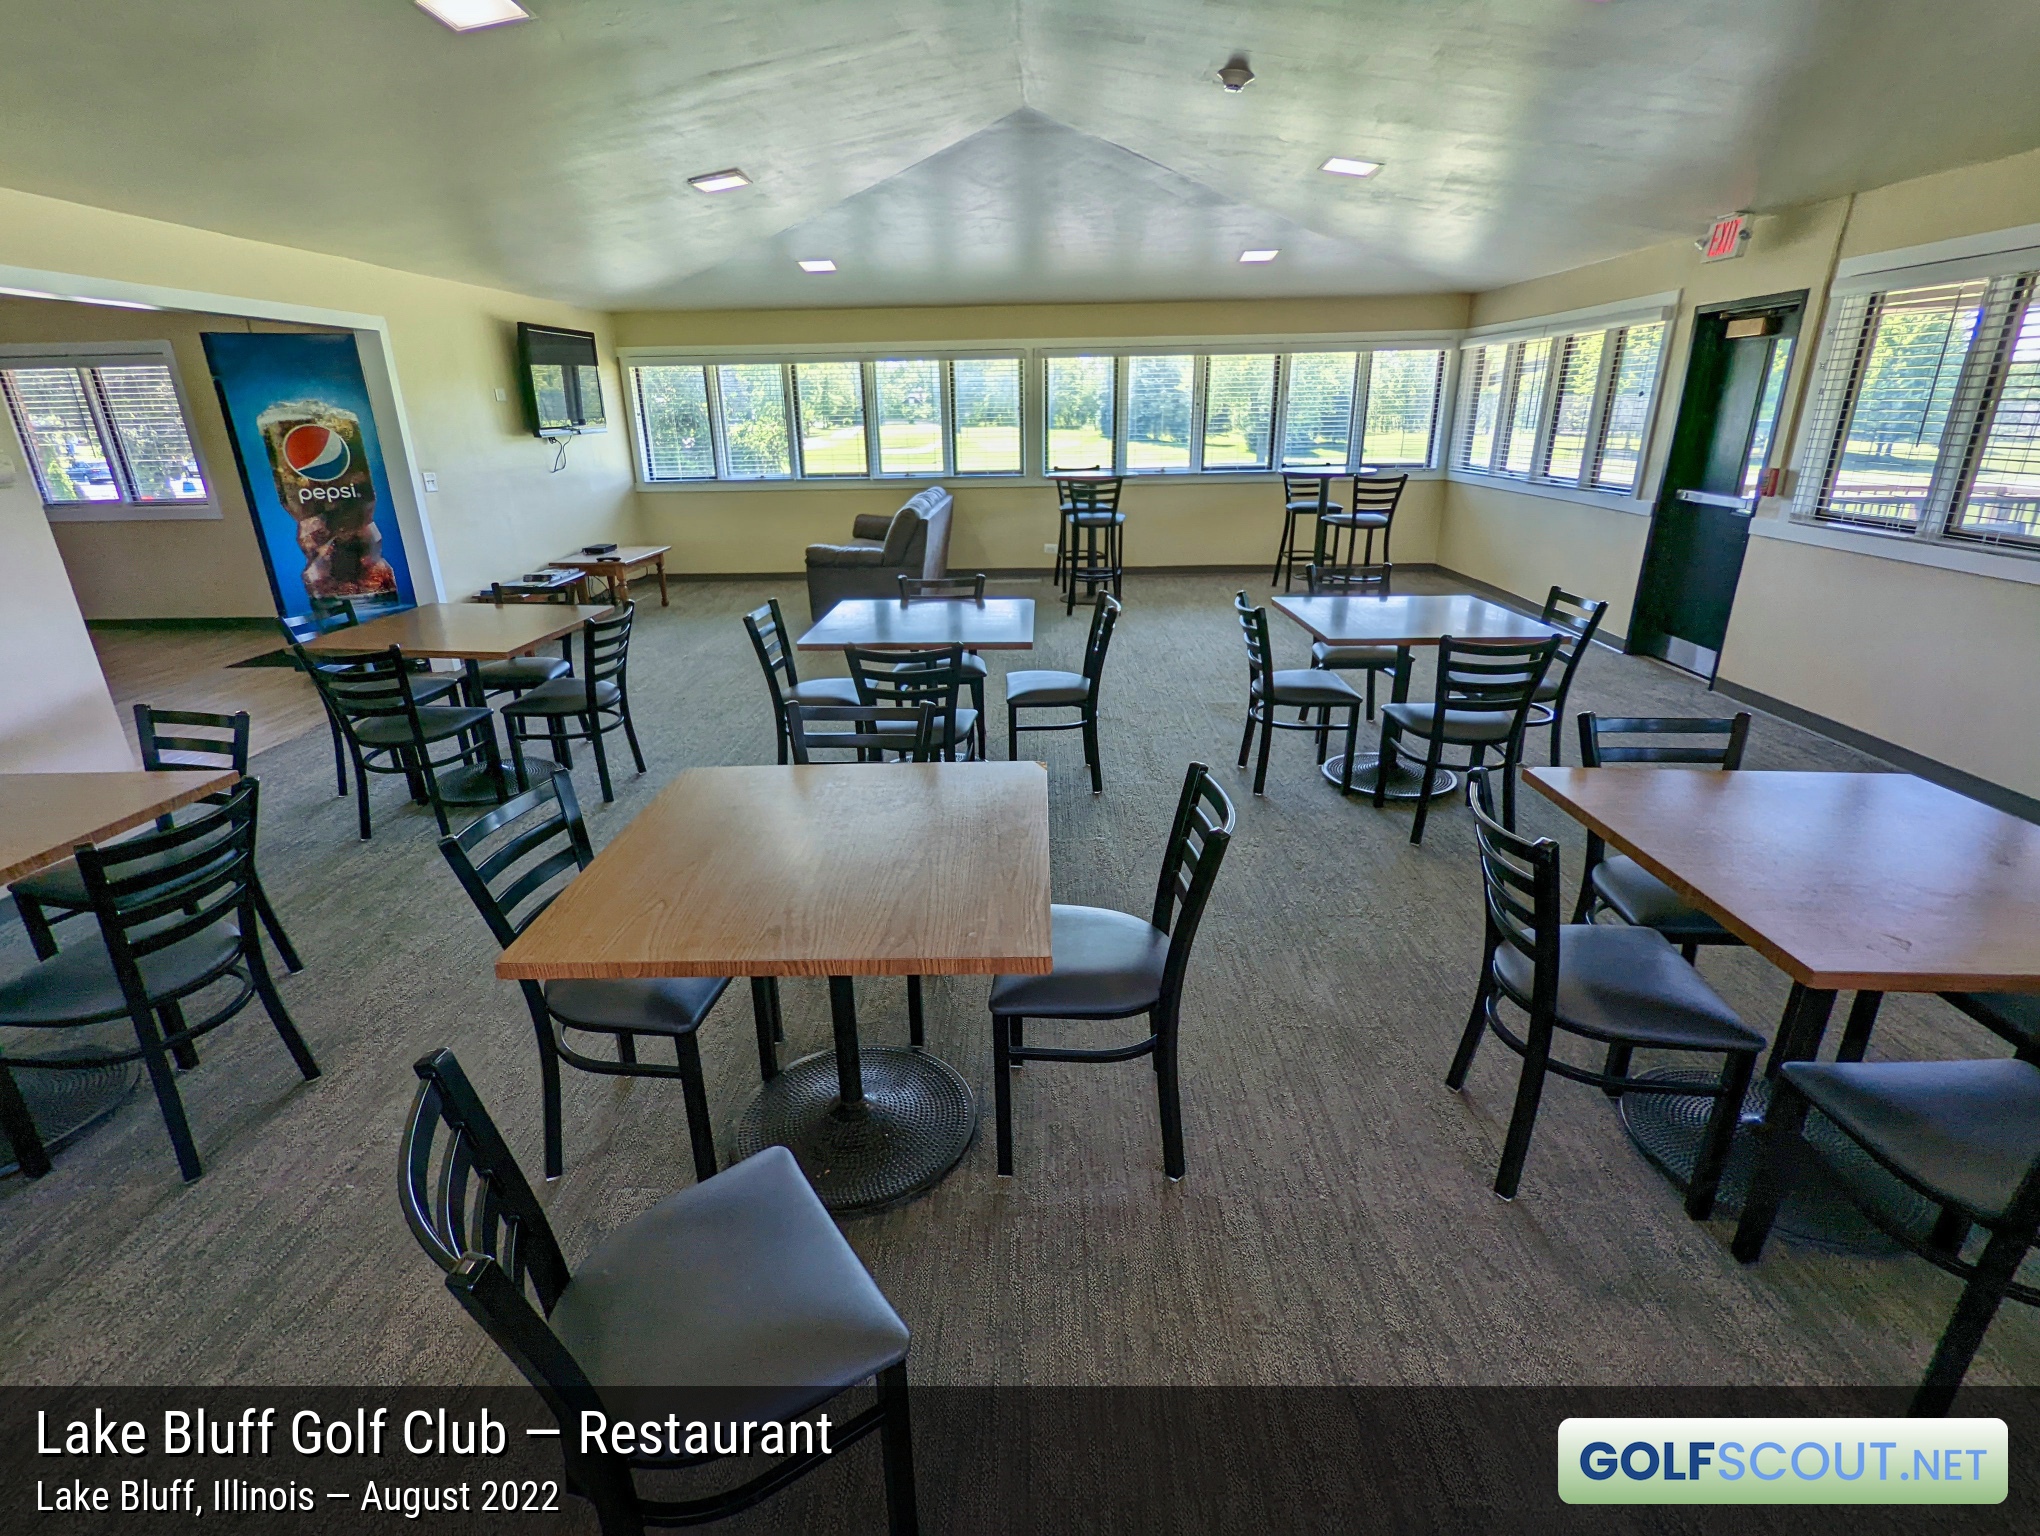 Photo of the restaurant at Lake Bluff Golf Club in Lake Bluff, Illinois. 